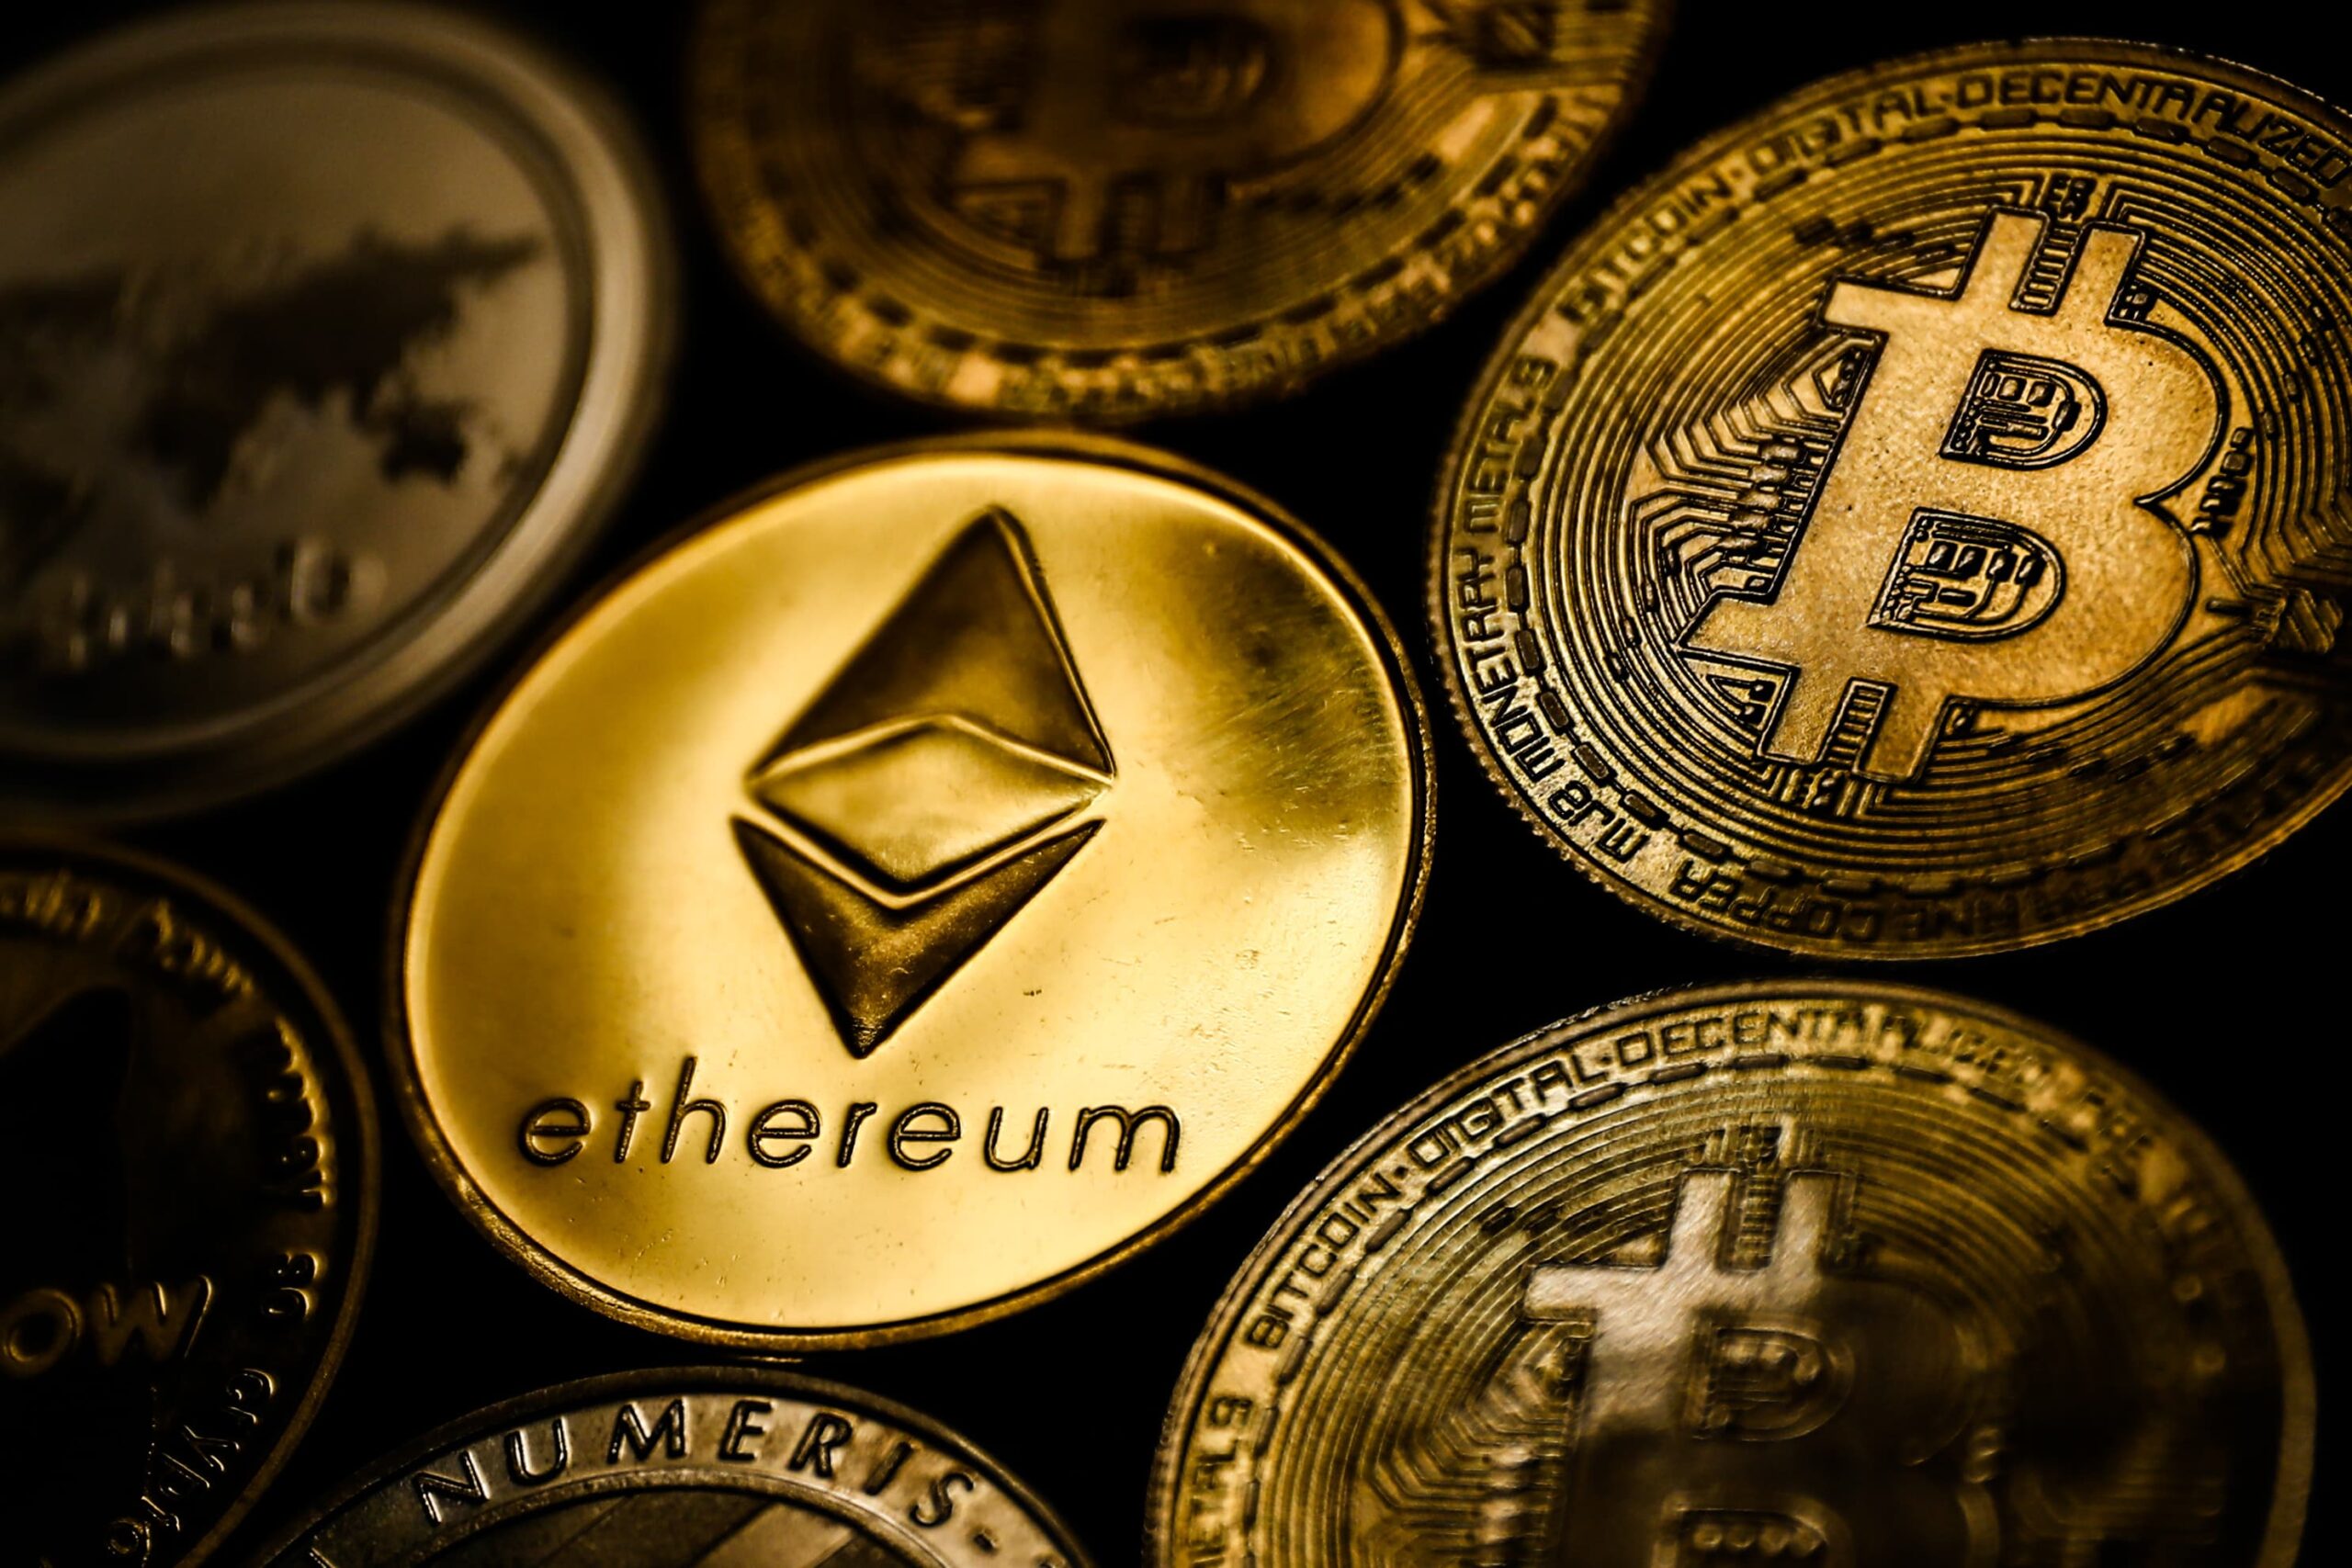 10 Best Cryptocurrencies To Invest in for 2021